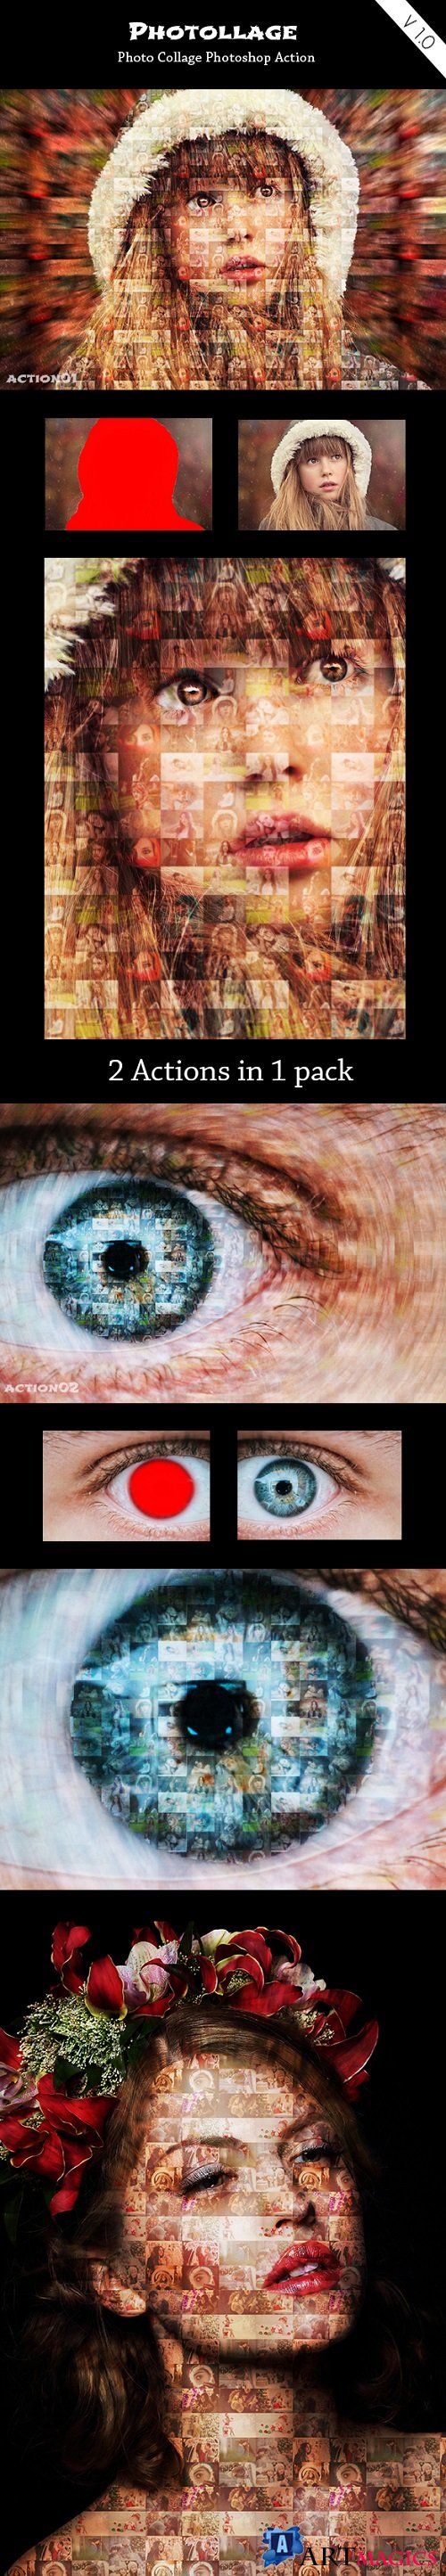 Photollage Ps Action Pack Ver 1.0 21194060